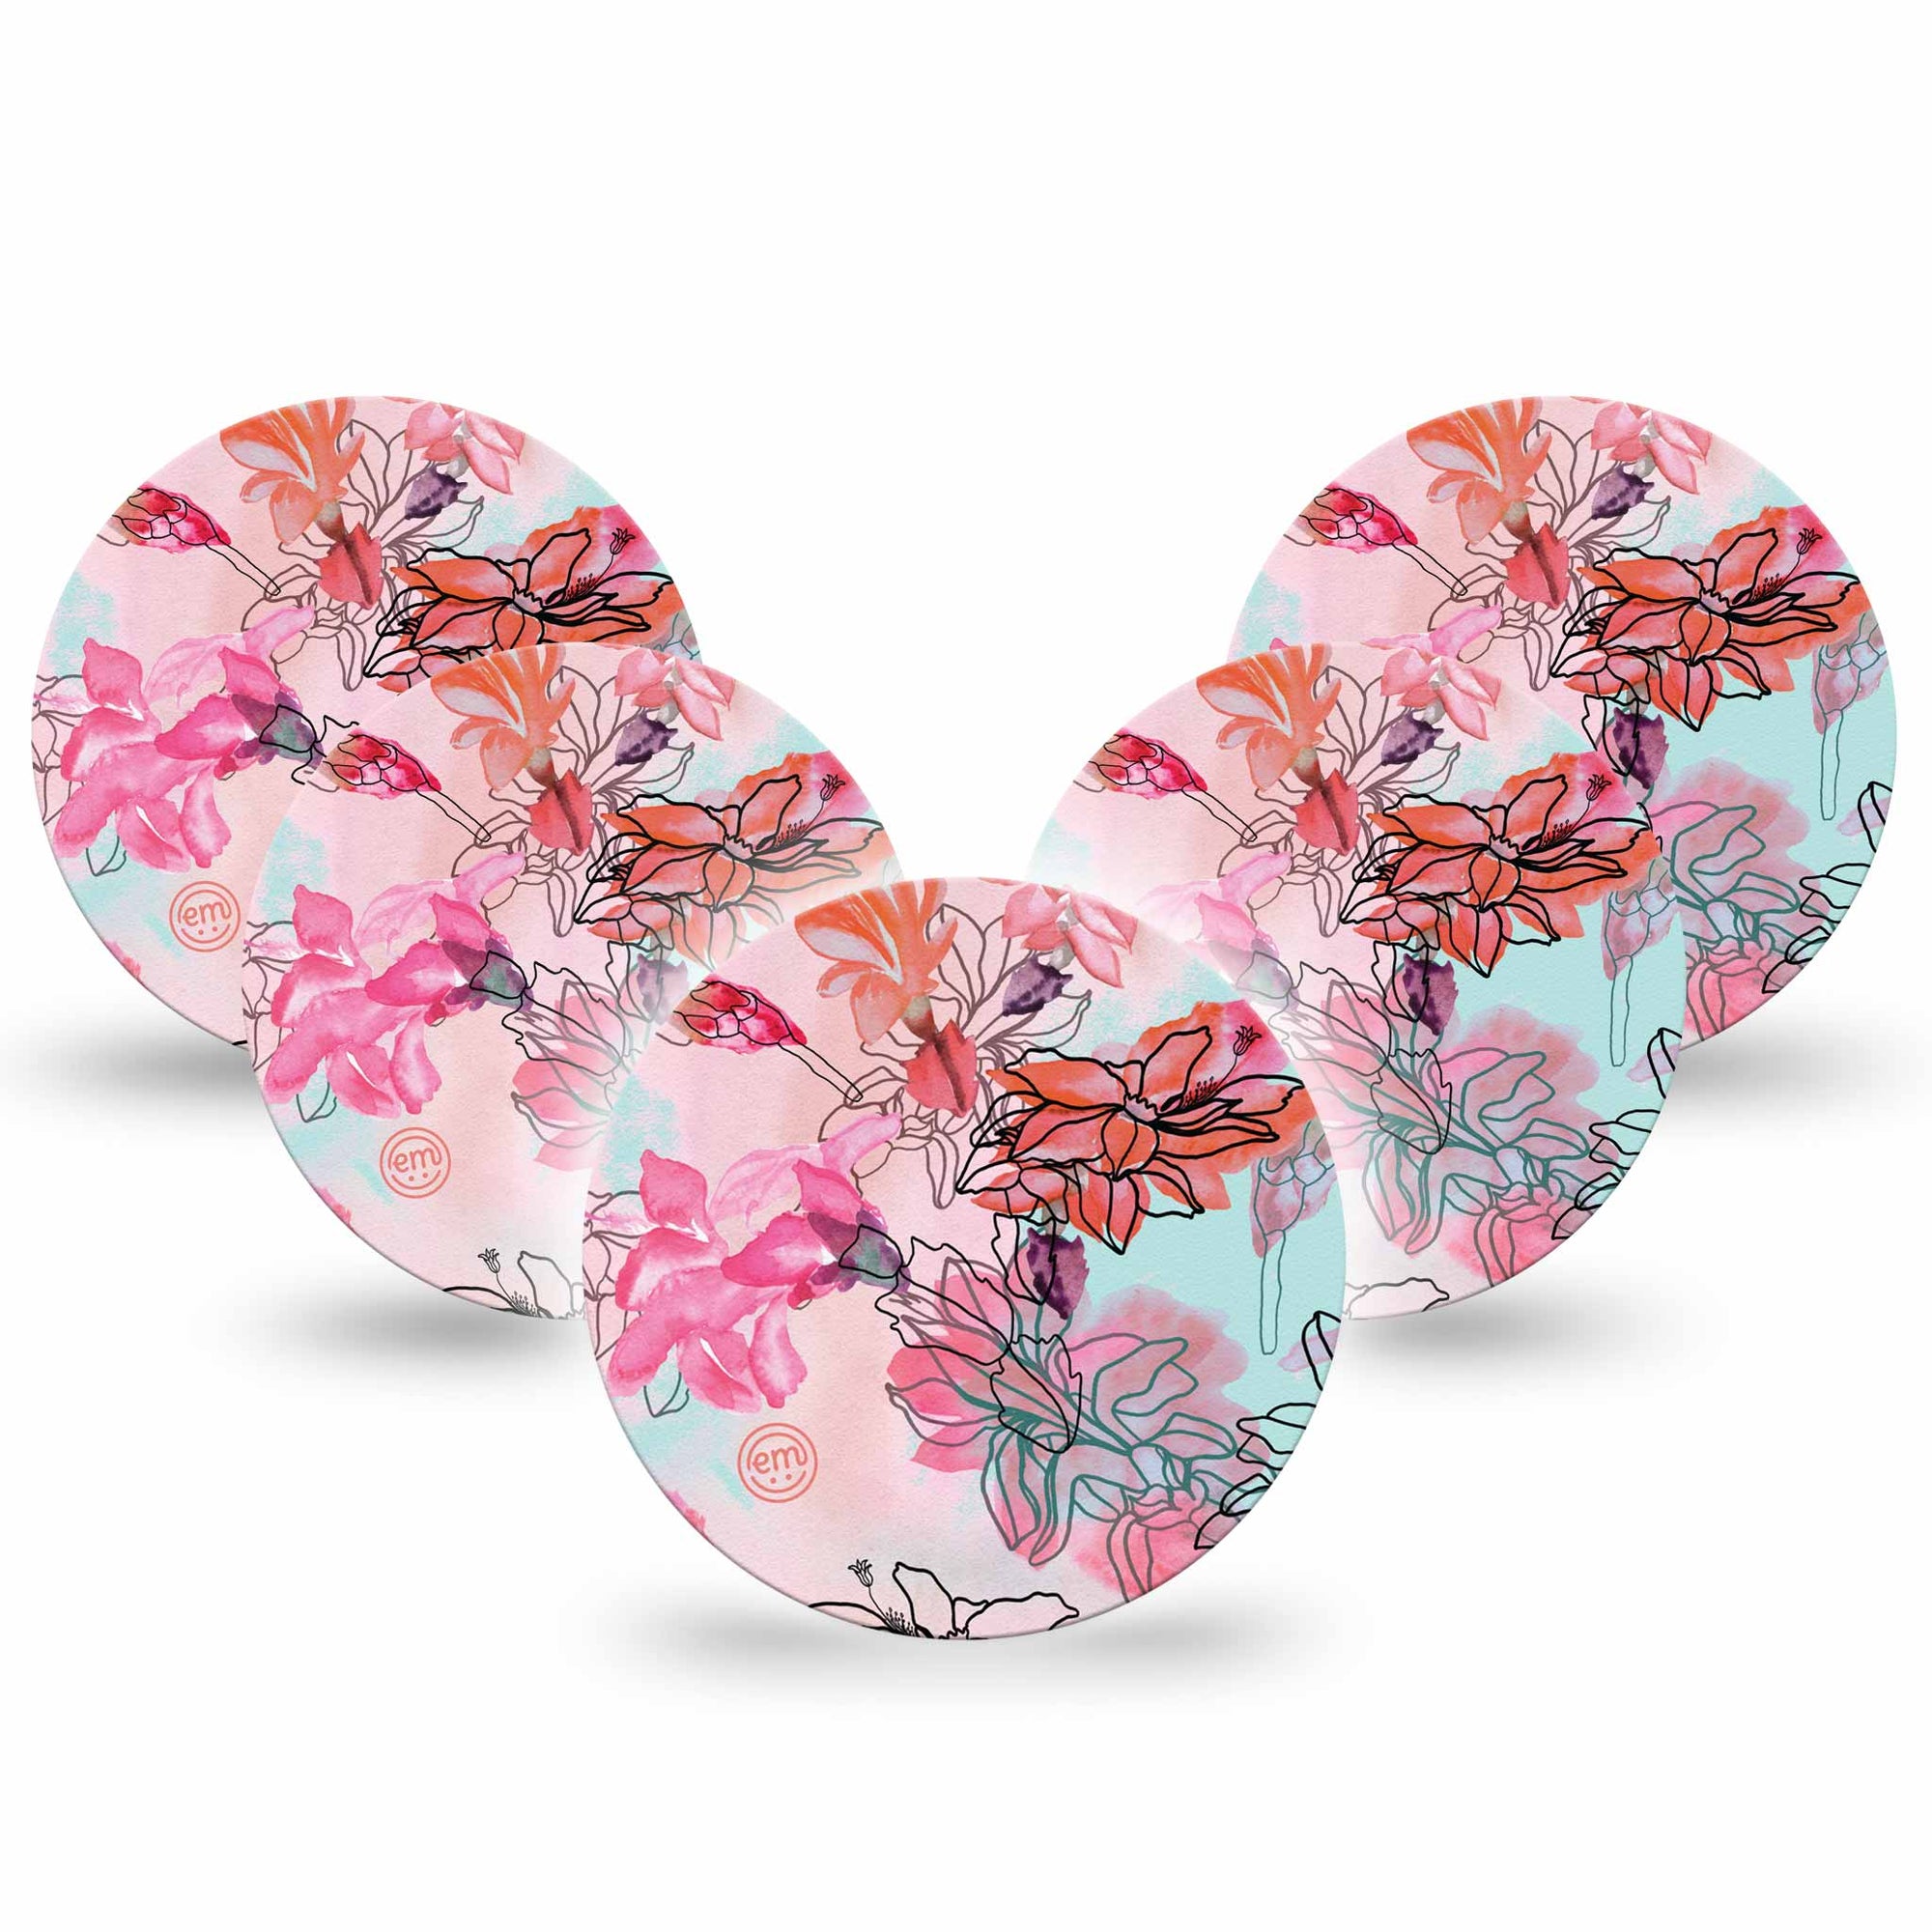 Whimsical Blossom Libre Overpatch 5-pack